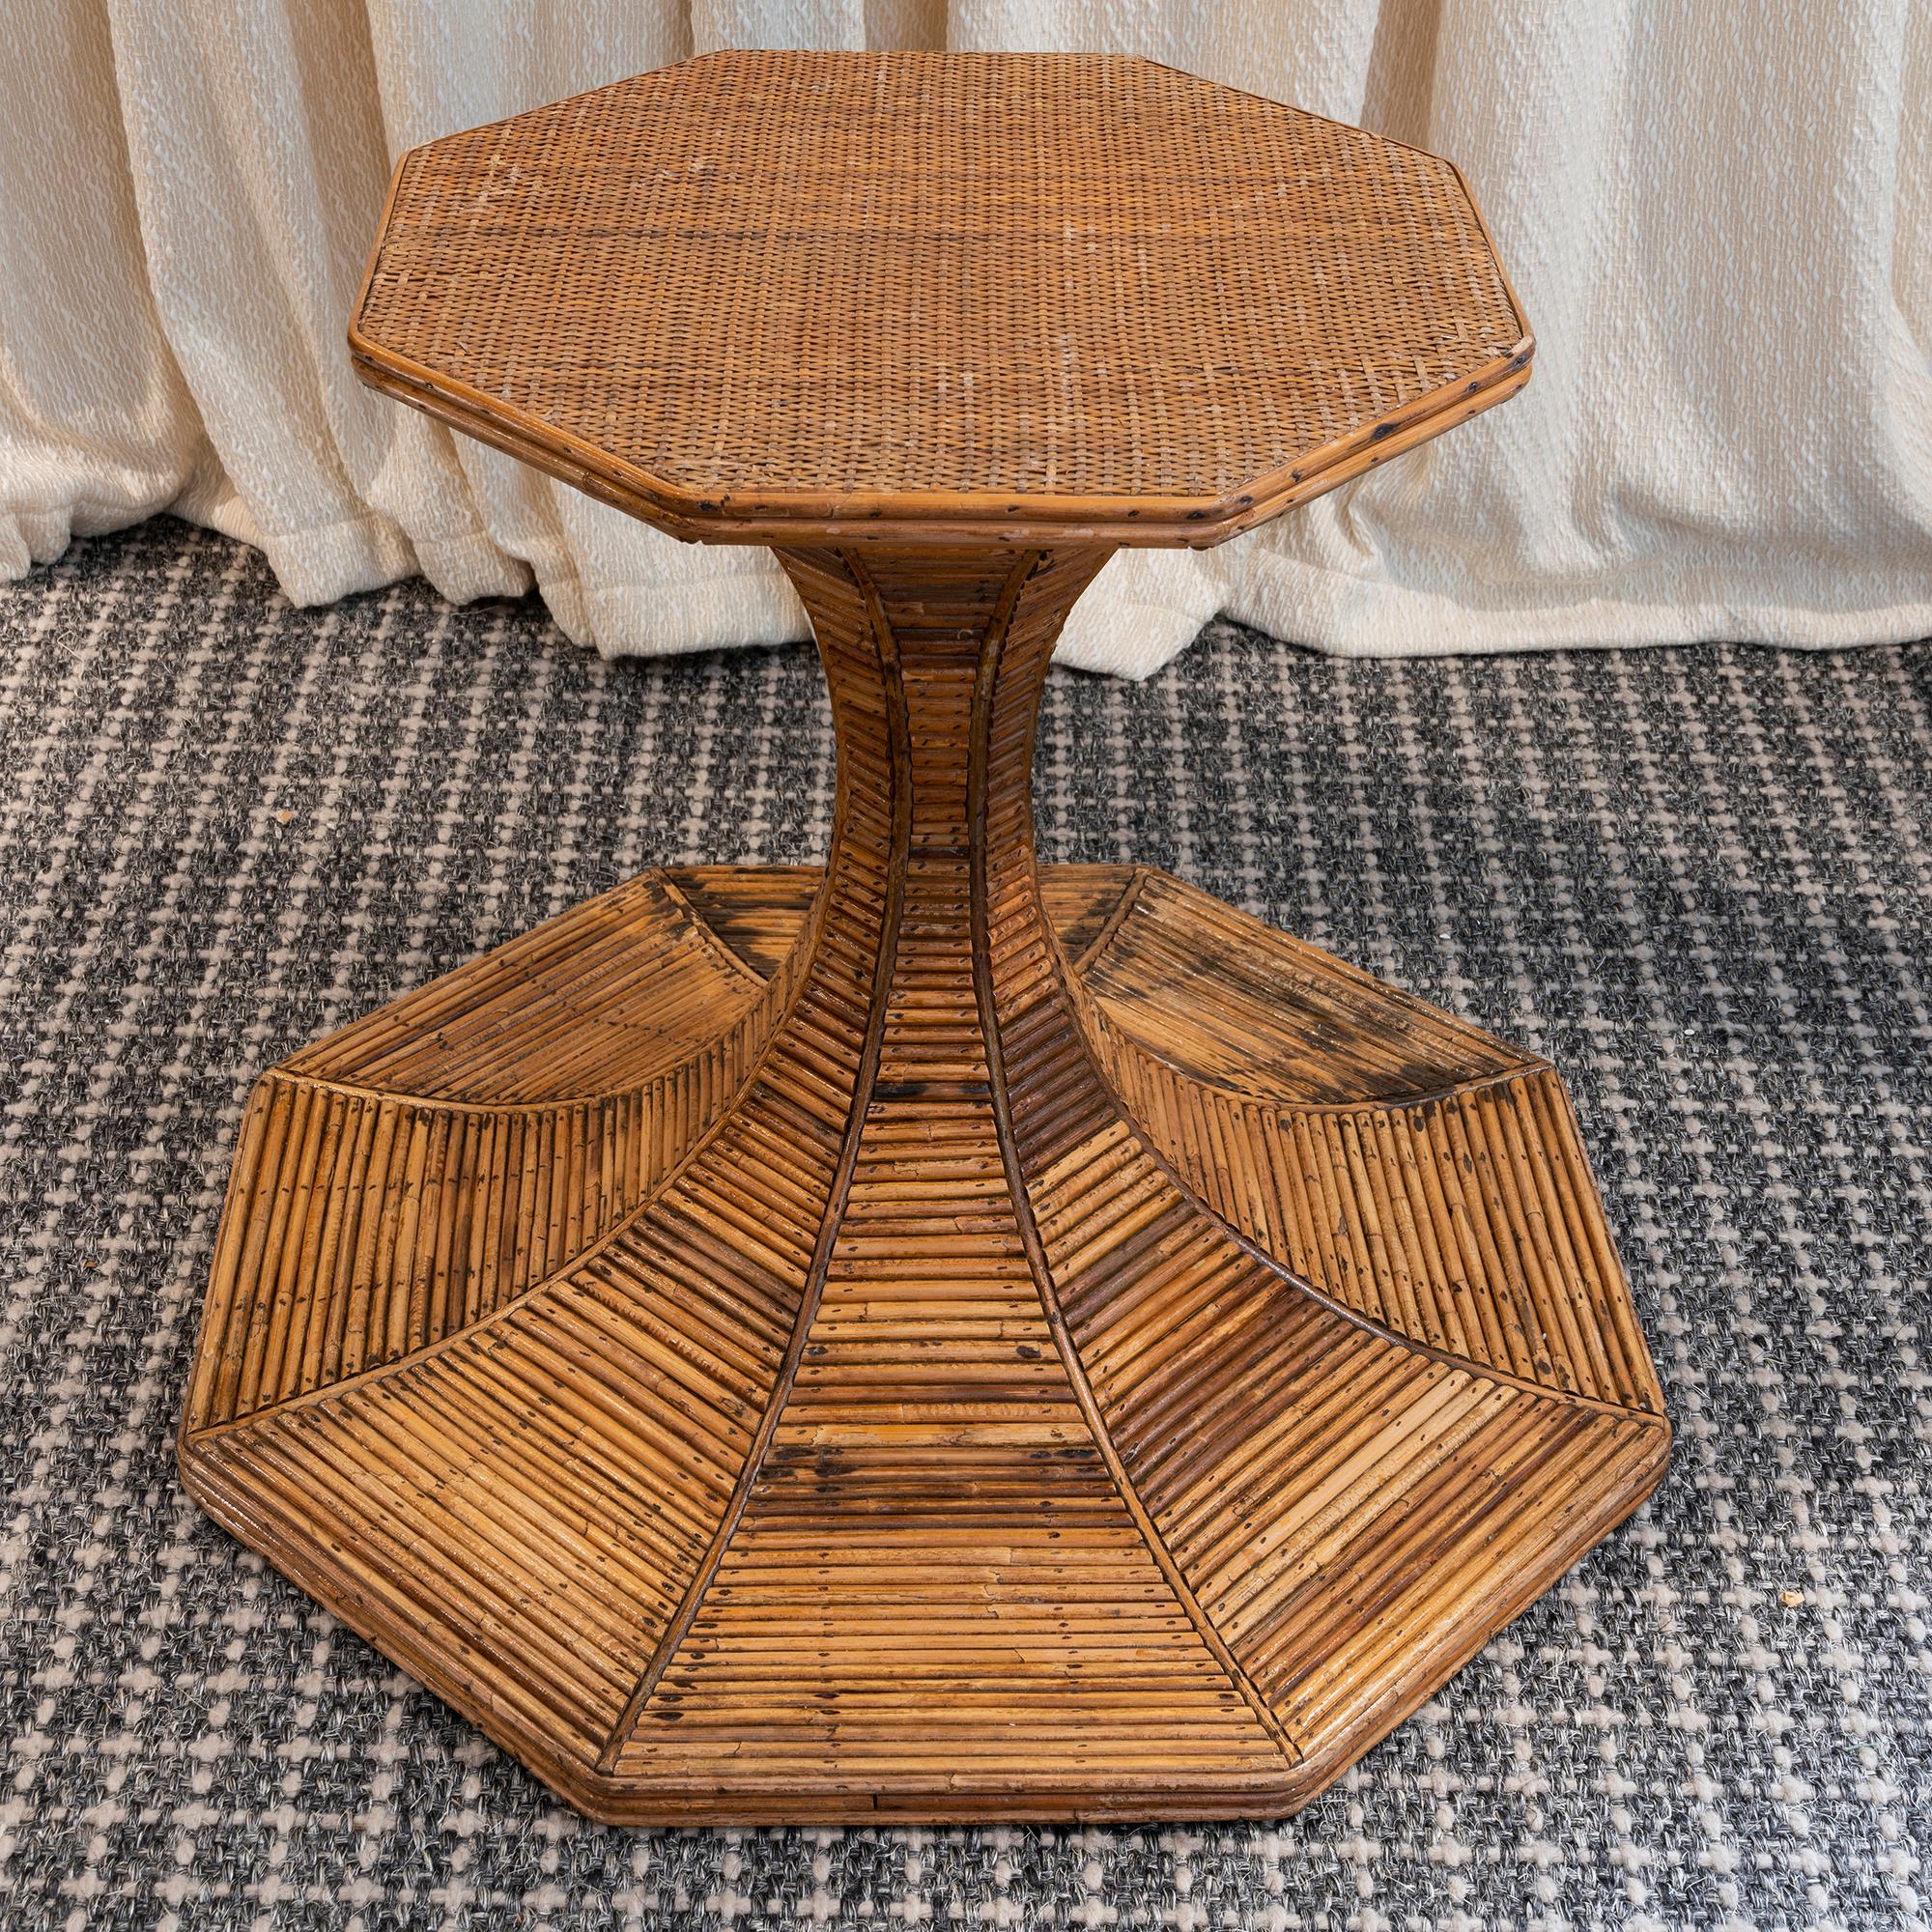 1970s Italian center / dining table by Vivai del Sud, famous for their furniture in bamboo and rattan, perfect condition and vintage patina, new octagonal clear plexiglass top cm 120 x 120 x H cm 3, base measurements top cm 60 x 60 bottom cm 90 x 90